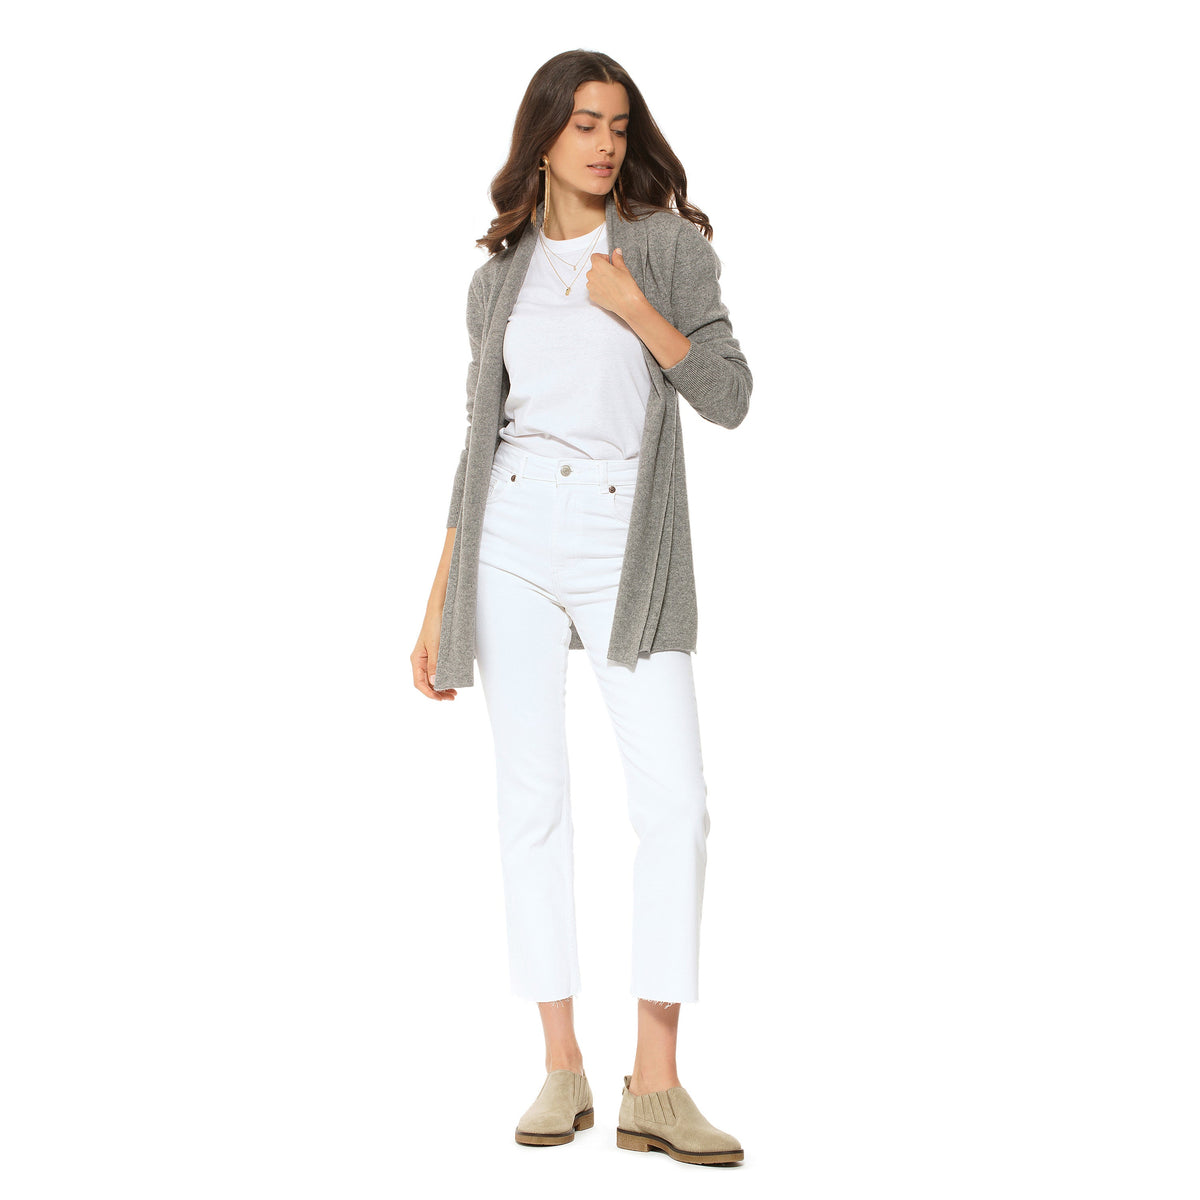 Women's Pure Cashmere Open Front Cardigan